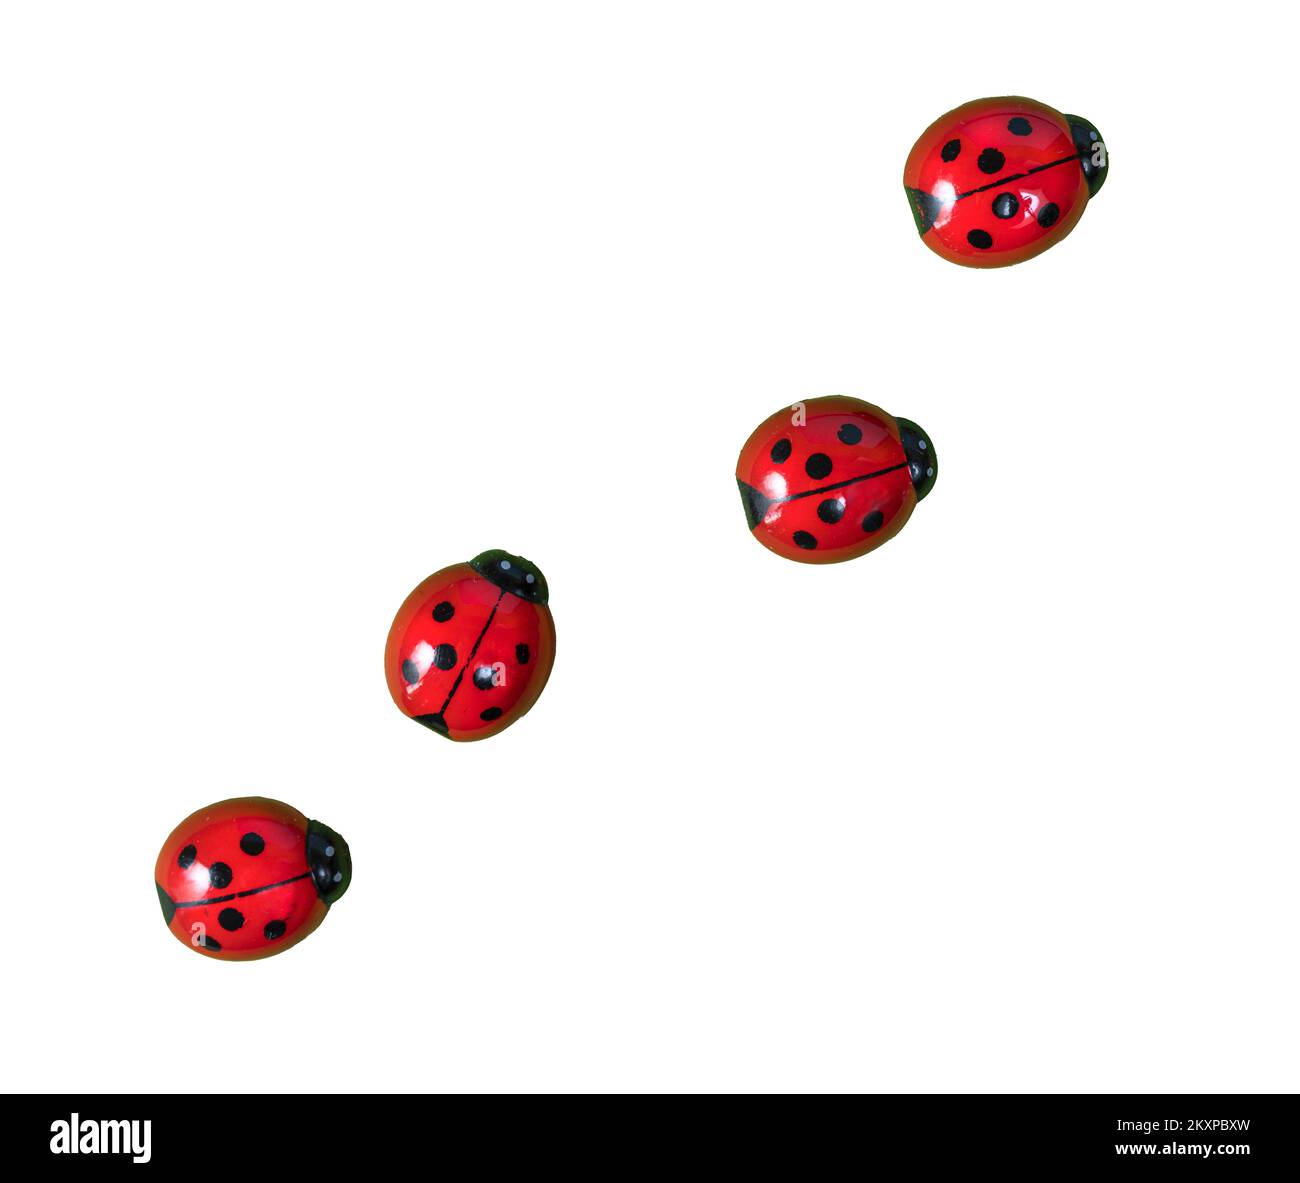 view from above of some ladybugs on a transparent surface Stock Photo